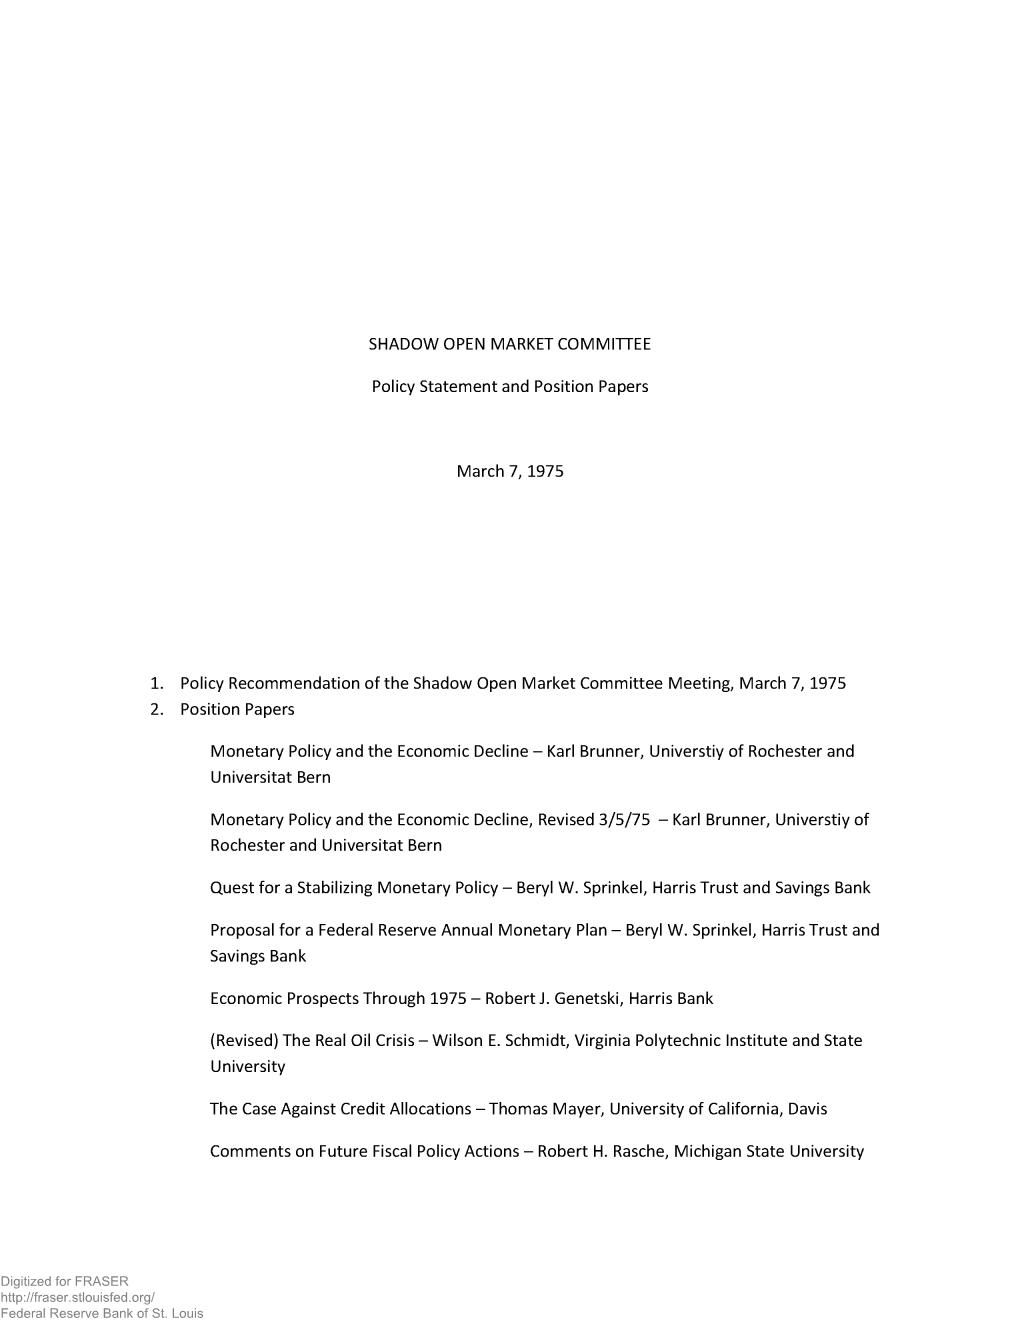 Shadow Open Market Committee Policy Statement and Position Papers